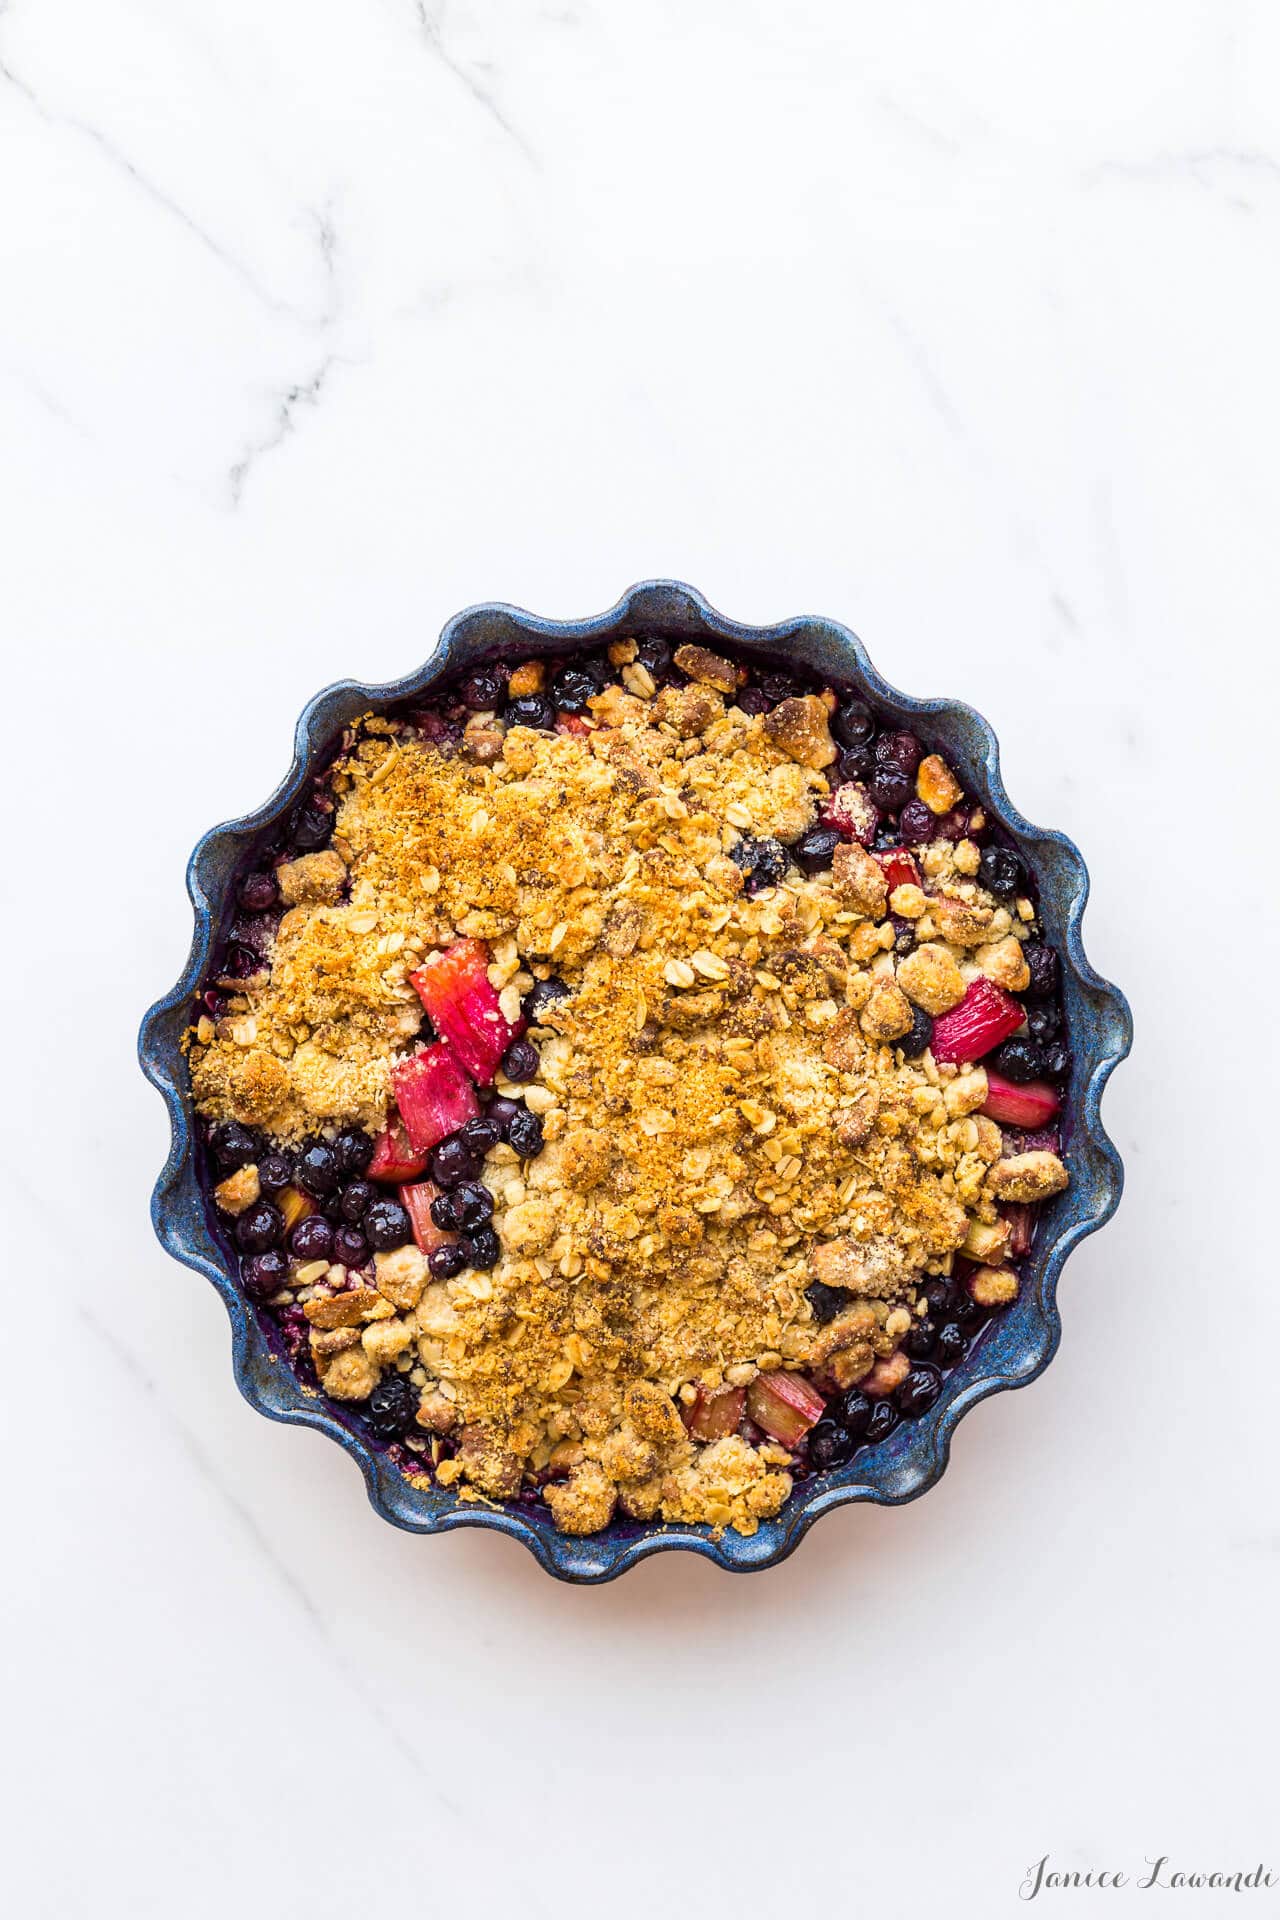 Blueberry rhubarb crumble with a marzipan oat crumble topping served in a round ceramic blue baking dish with a fluted edge